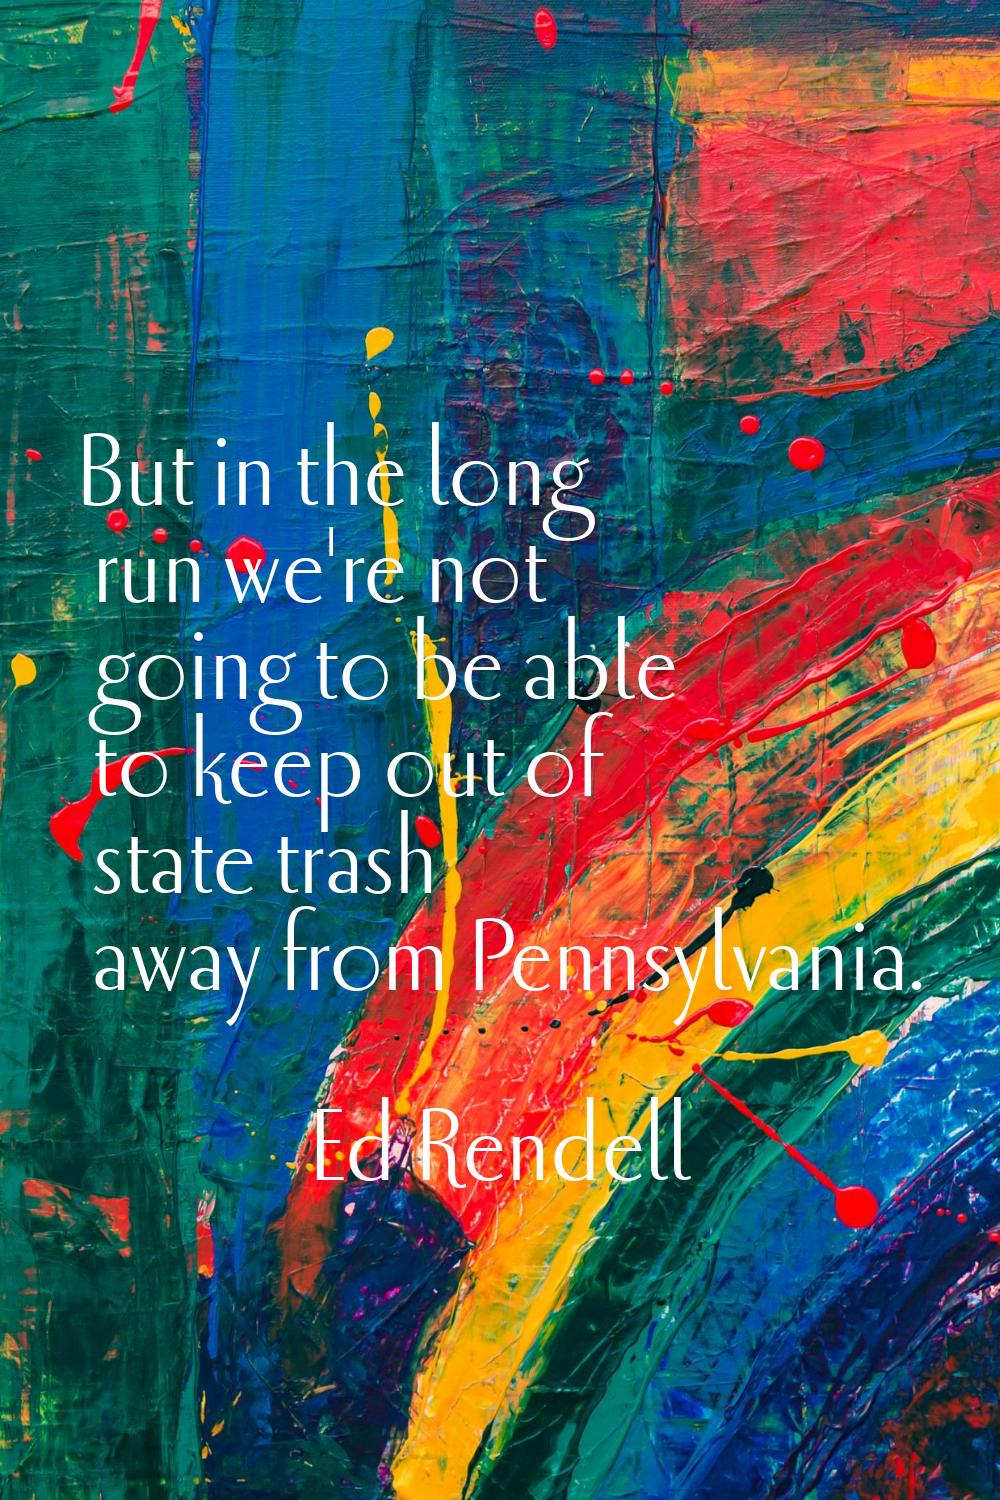 But in the long run we're not going to be able to keep out of state trash away from Pennsylvania.